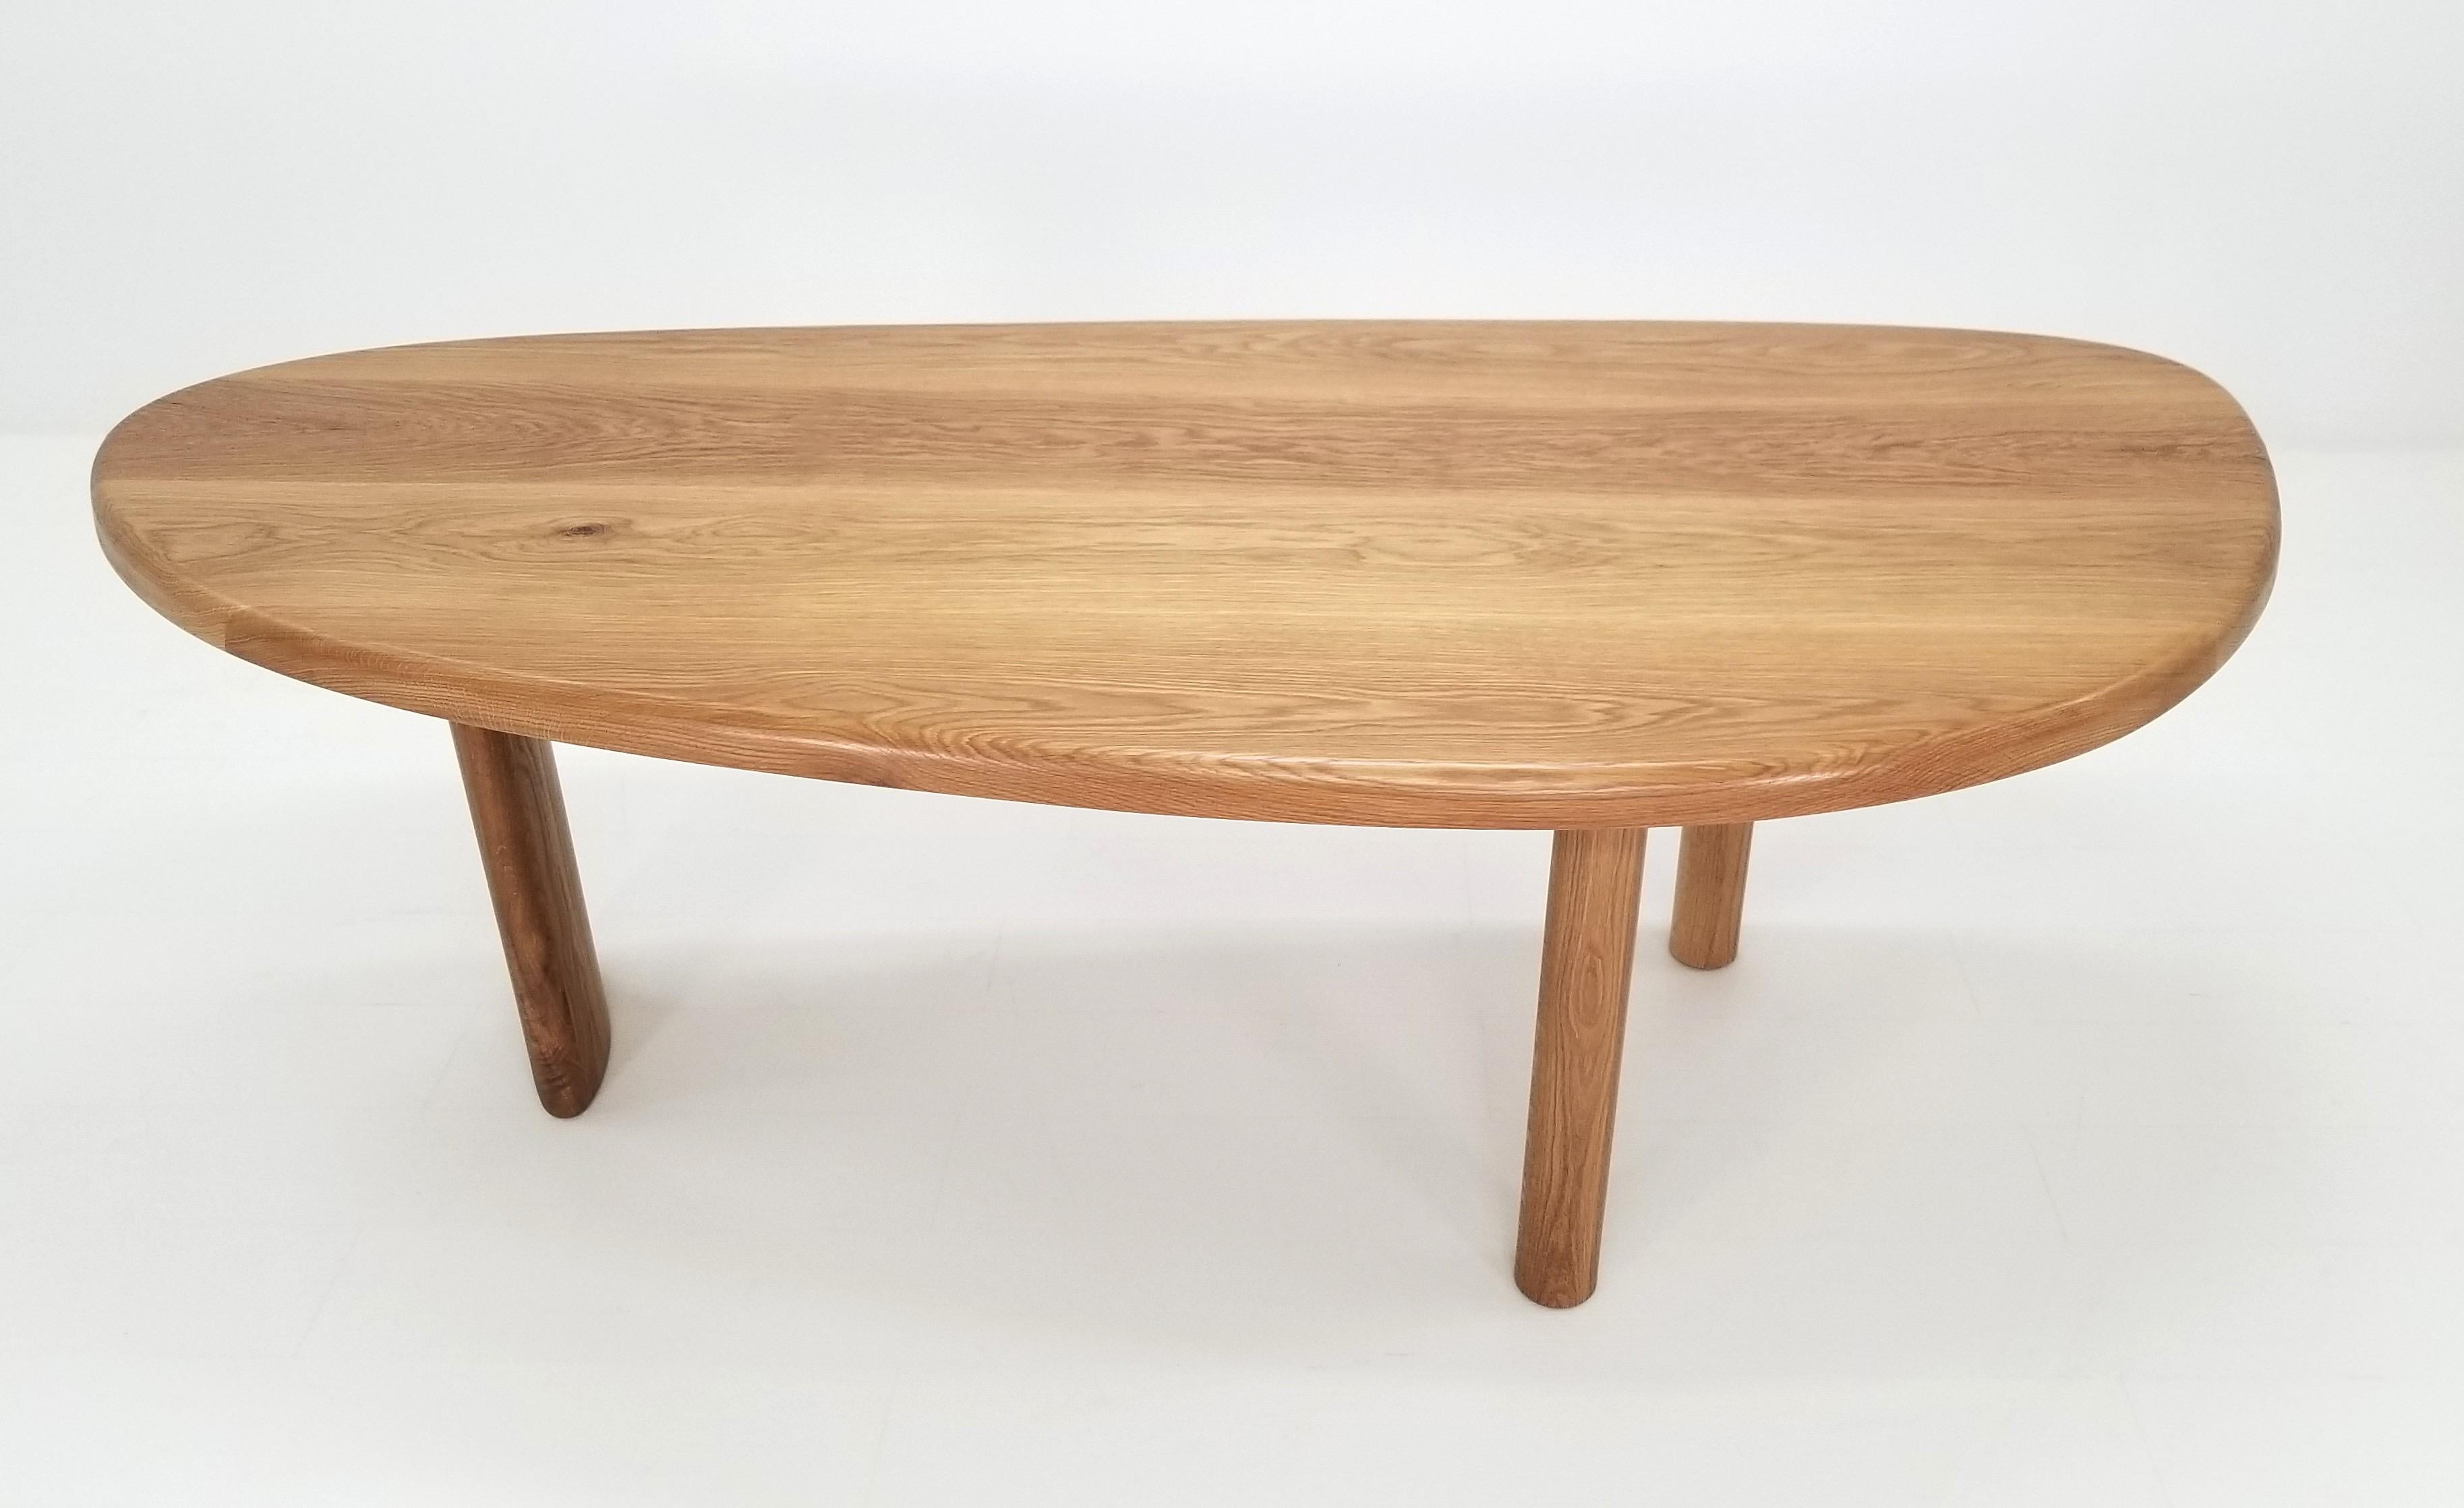 This free-form table inspired by Charlotte Perriand's Free Form Dining Table is made with premium FAS American hardwood. The hard-wax oil finish adds a beautiful golden tone to the white oak. This design features an organic shaped, two inch thick